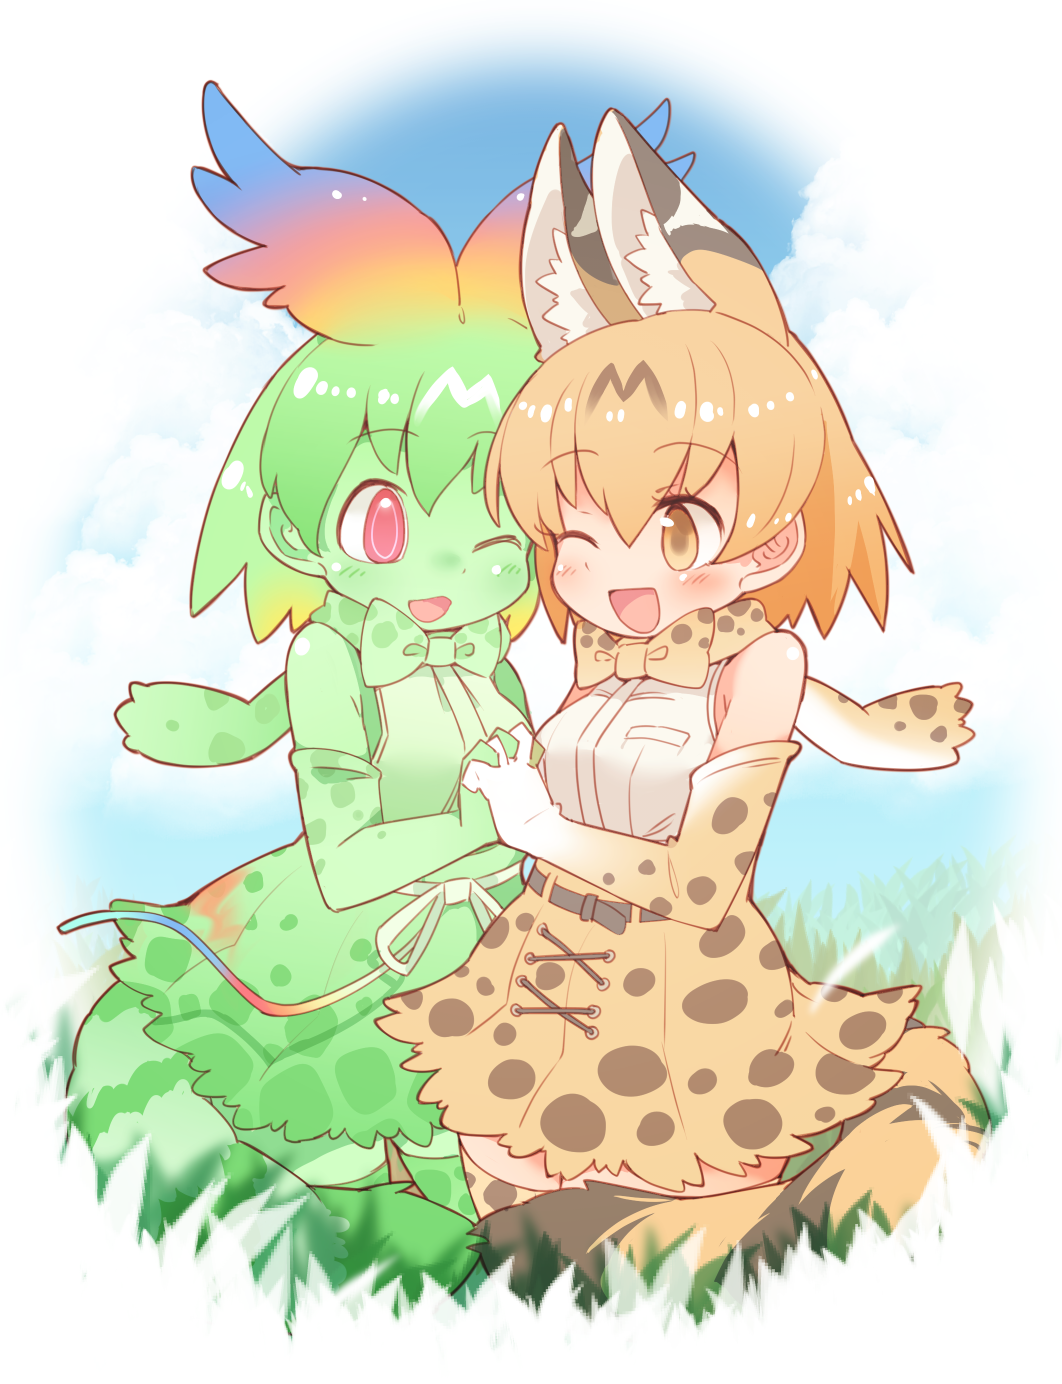 2girls ;d aliasing animal_ears bare_shoulders belt blonde_hair blush cerval clouds day elbow_gloves extra_ears eye_contact eyebrows_visible_through_hair gloves gradient_gloves grass green_gloves green_hair green_legwear green_neckwear green_shirt green_skin green_skirt hair_between_eyes hand_holding high-waist_skirt highres ini_(inunabe00) interlocked_fingers kemono_friends looking_at_another multiple_girls one_eye_closed open_mouth outdoors print_gloves print_legwear print_neckwear print_skirt red_eyes serval_(kemono_friends) serval_ears serval_tail shirt short_hair skirt sky sleeveless smile tail thigh-highs white_gloves yellow_eyes yellow_gloves yellow_skirt zettai_ryouiki